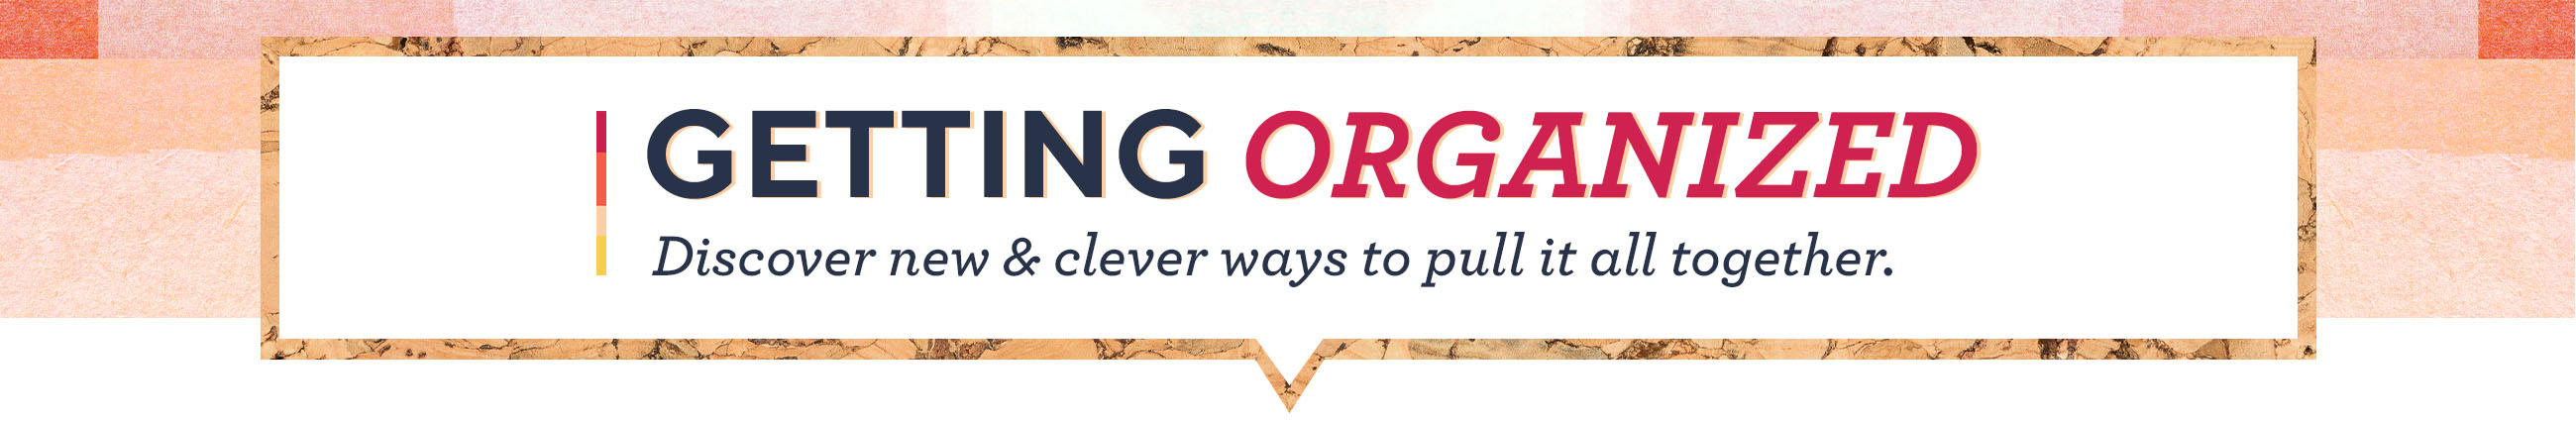 Getting Organized  Discover new & clever ways to pull it all together.